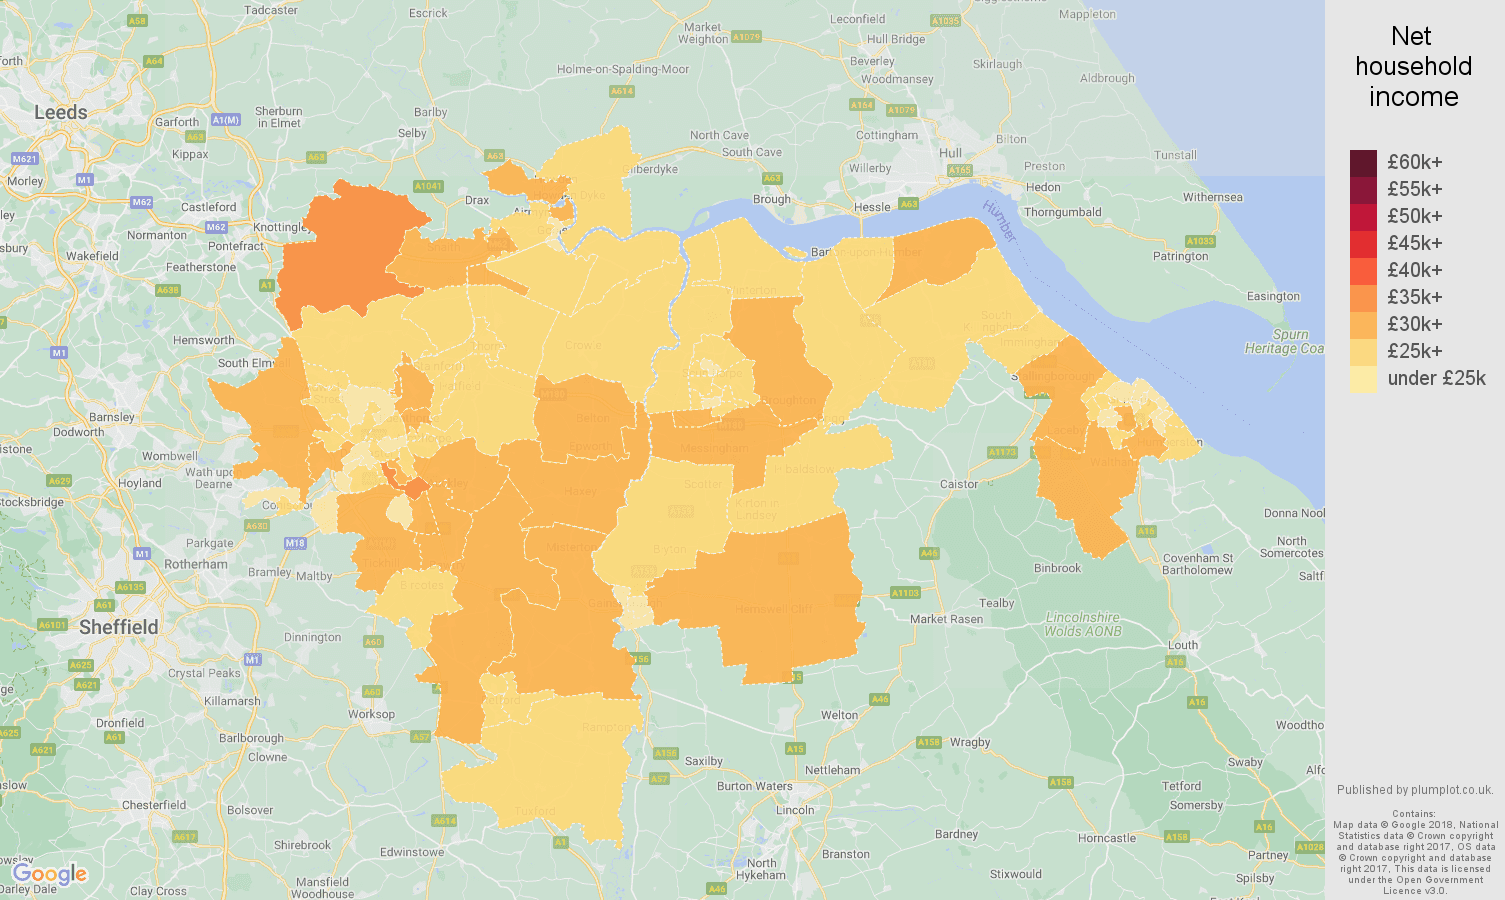 Doncaster net household income map